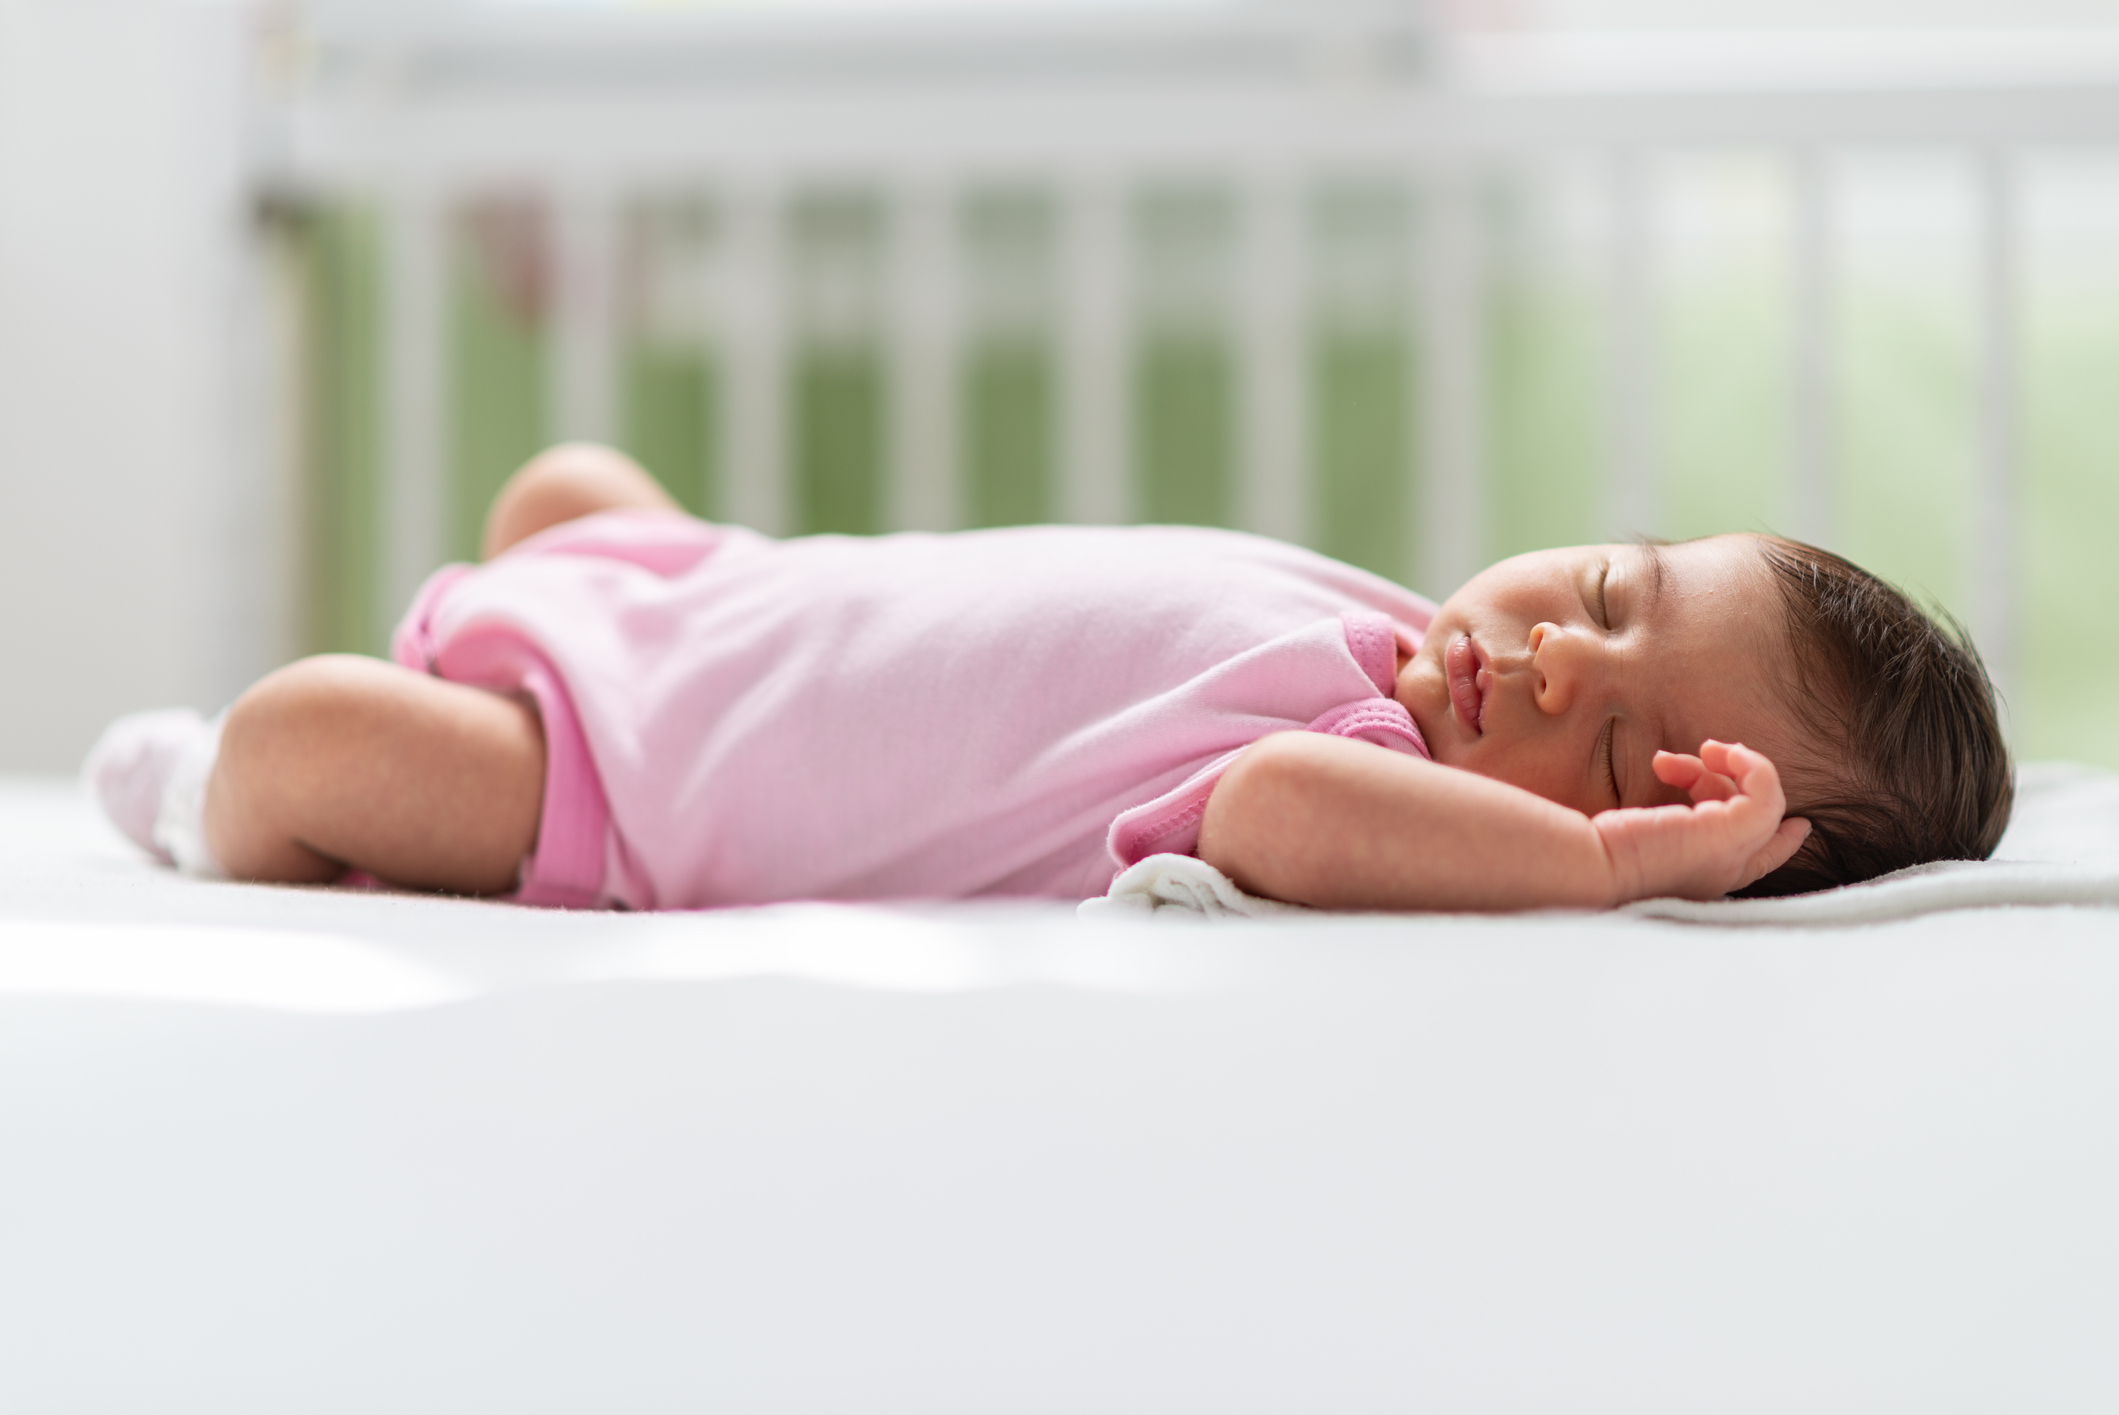 research on sids has shown that babies should be